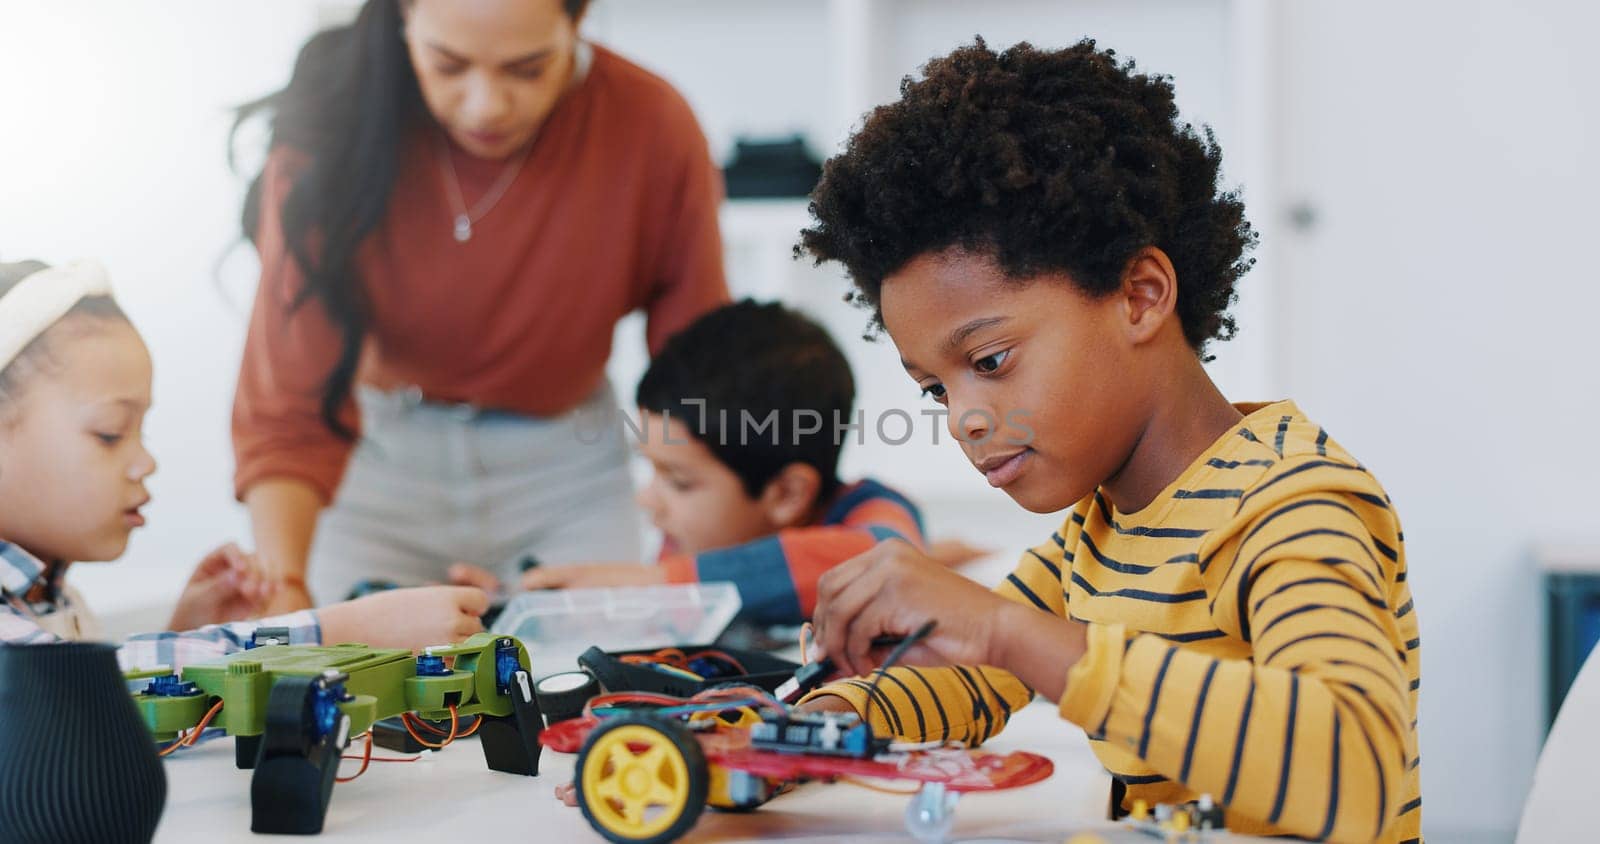 Technology, boy and car robotics at school for learning, education or electronics with car toys for innovation. Classroom, learners and transportation knowledge in science class for research or study by YuriArcurs